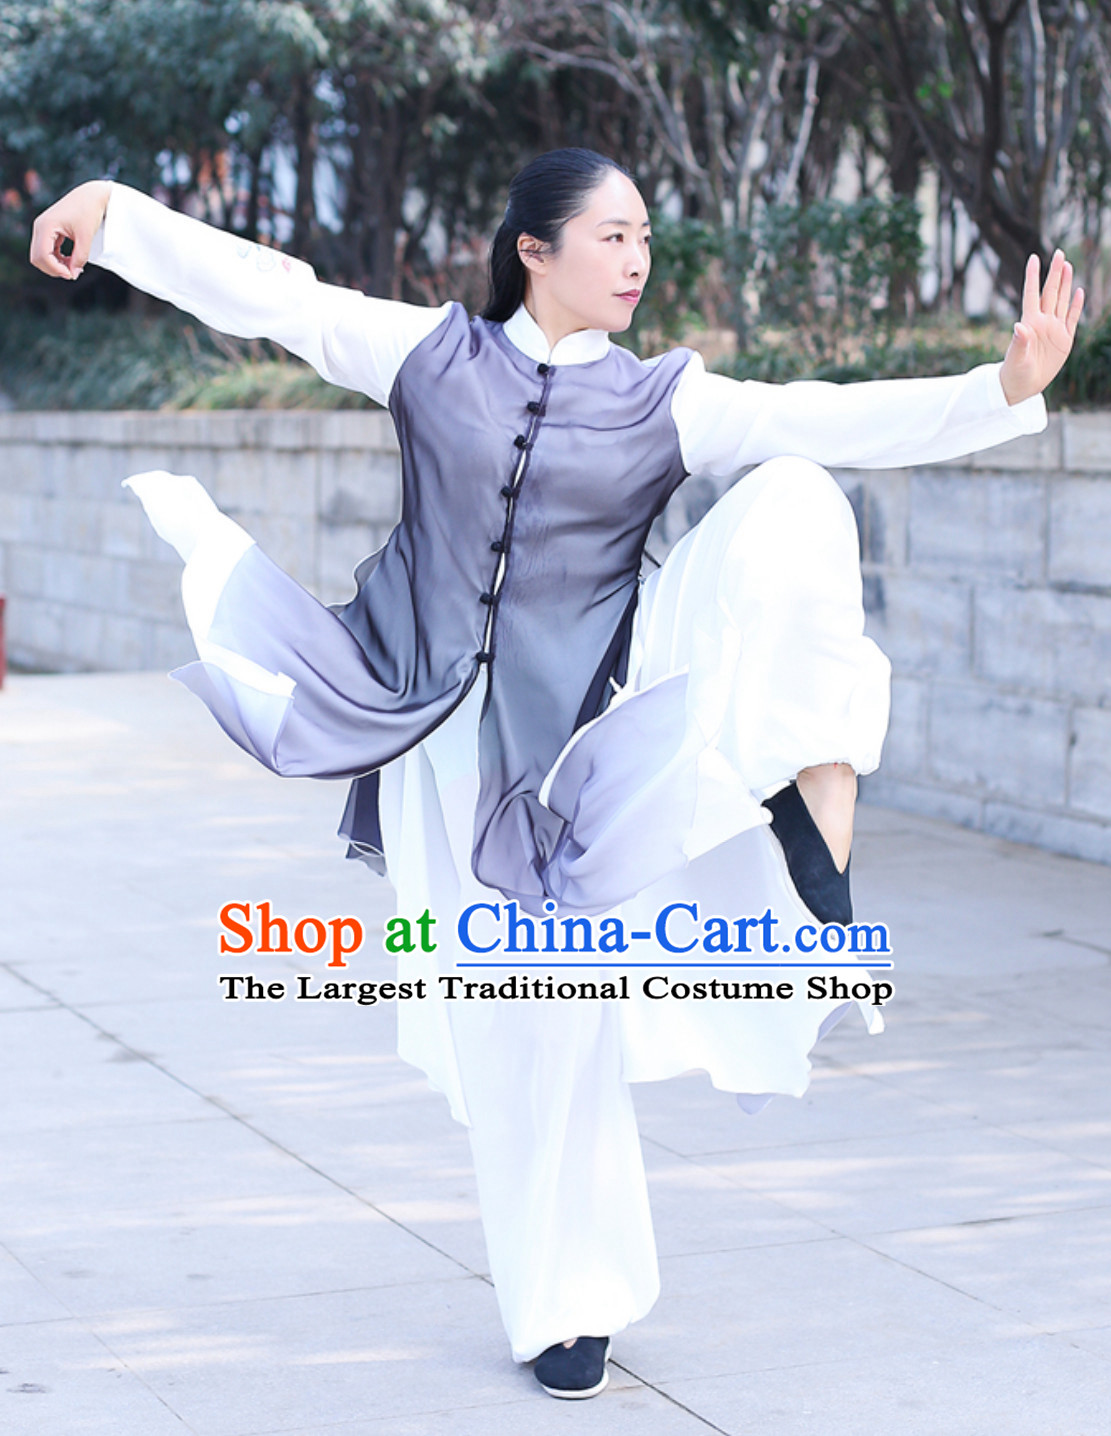 Top Chinese Traditional Competition Championship Tai Chi Taiji Kung Fu Wing Chun Shaolin Master Suits Kungfu Clothing Complete Set